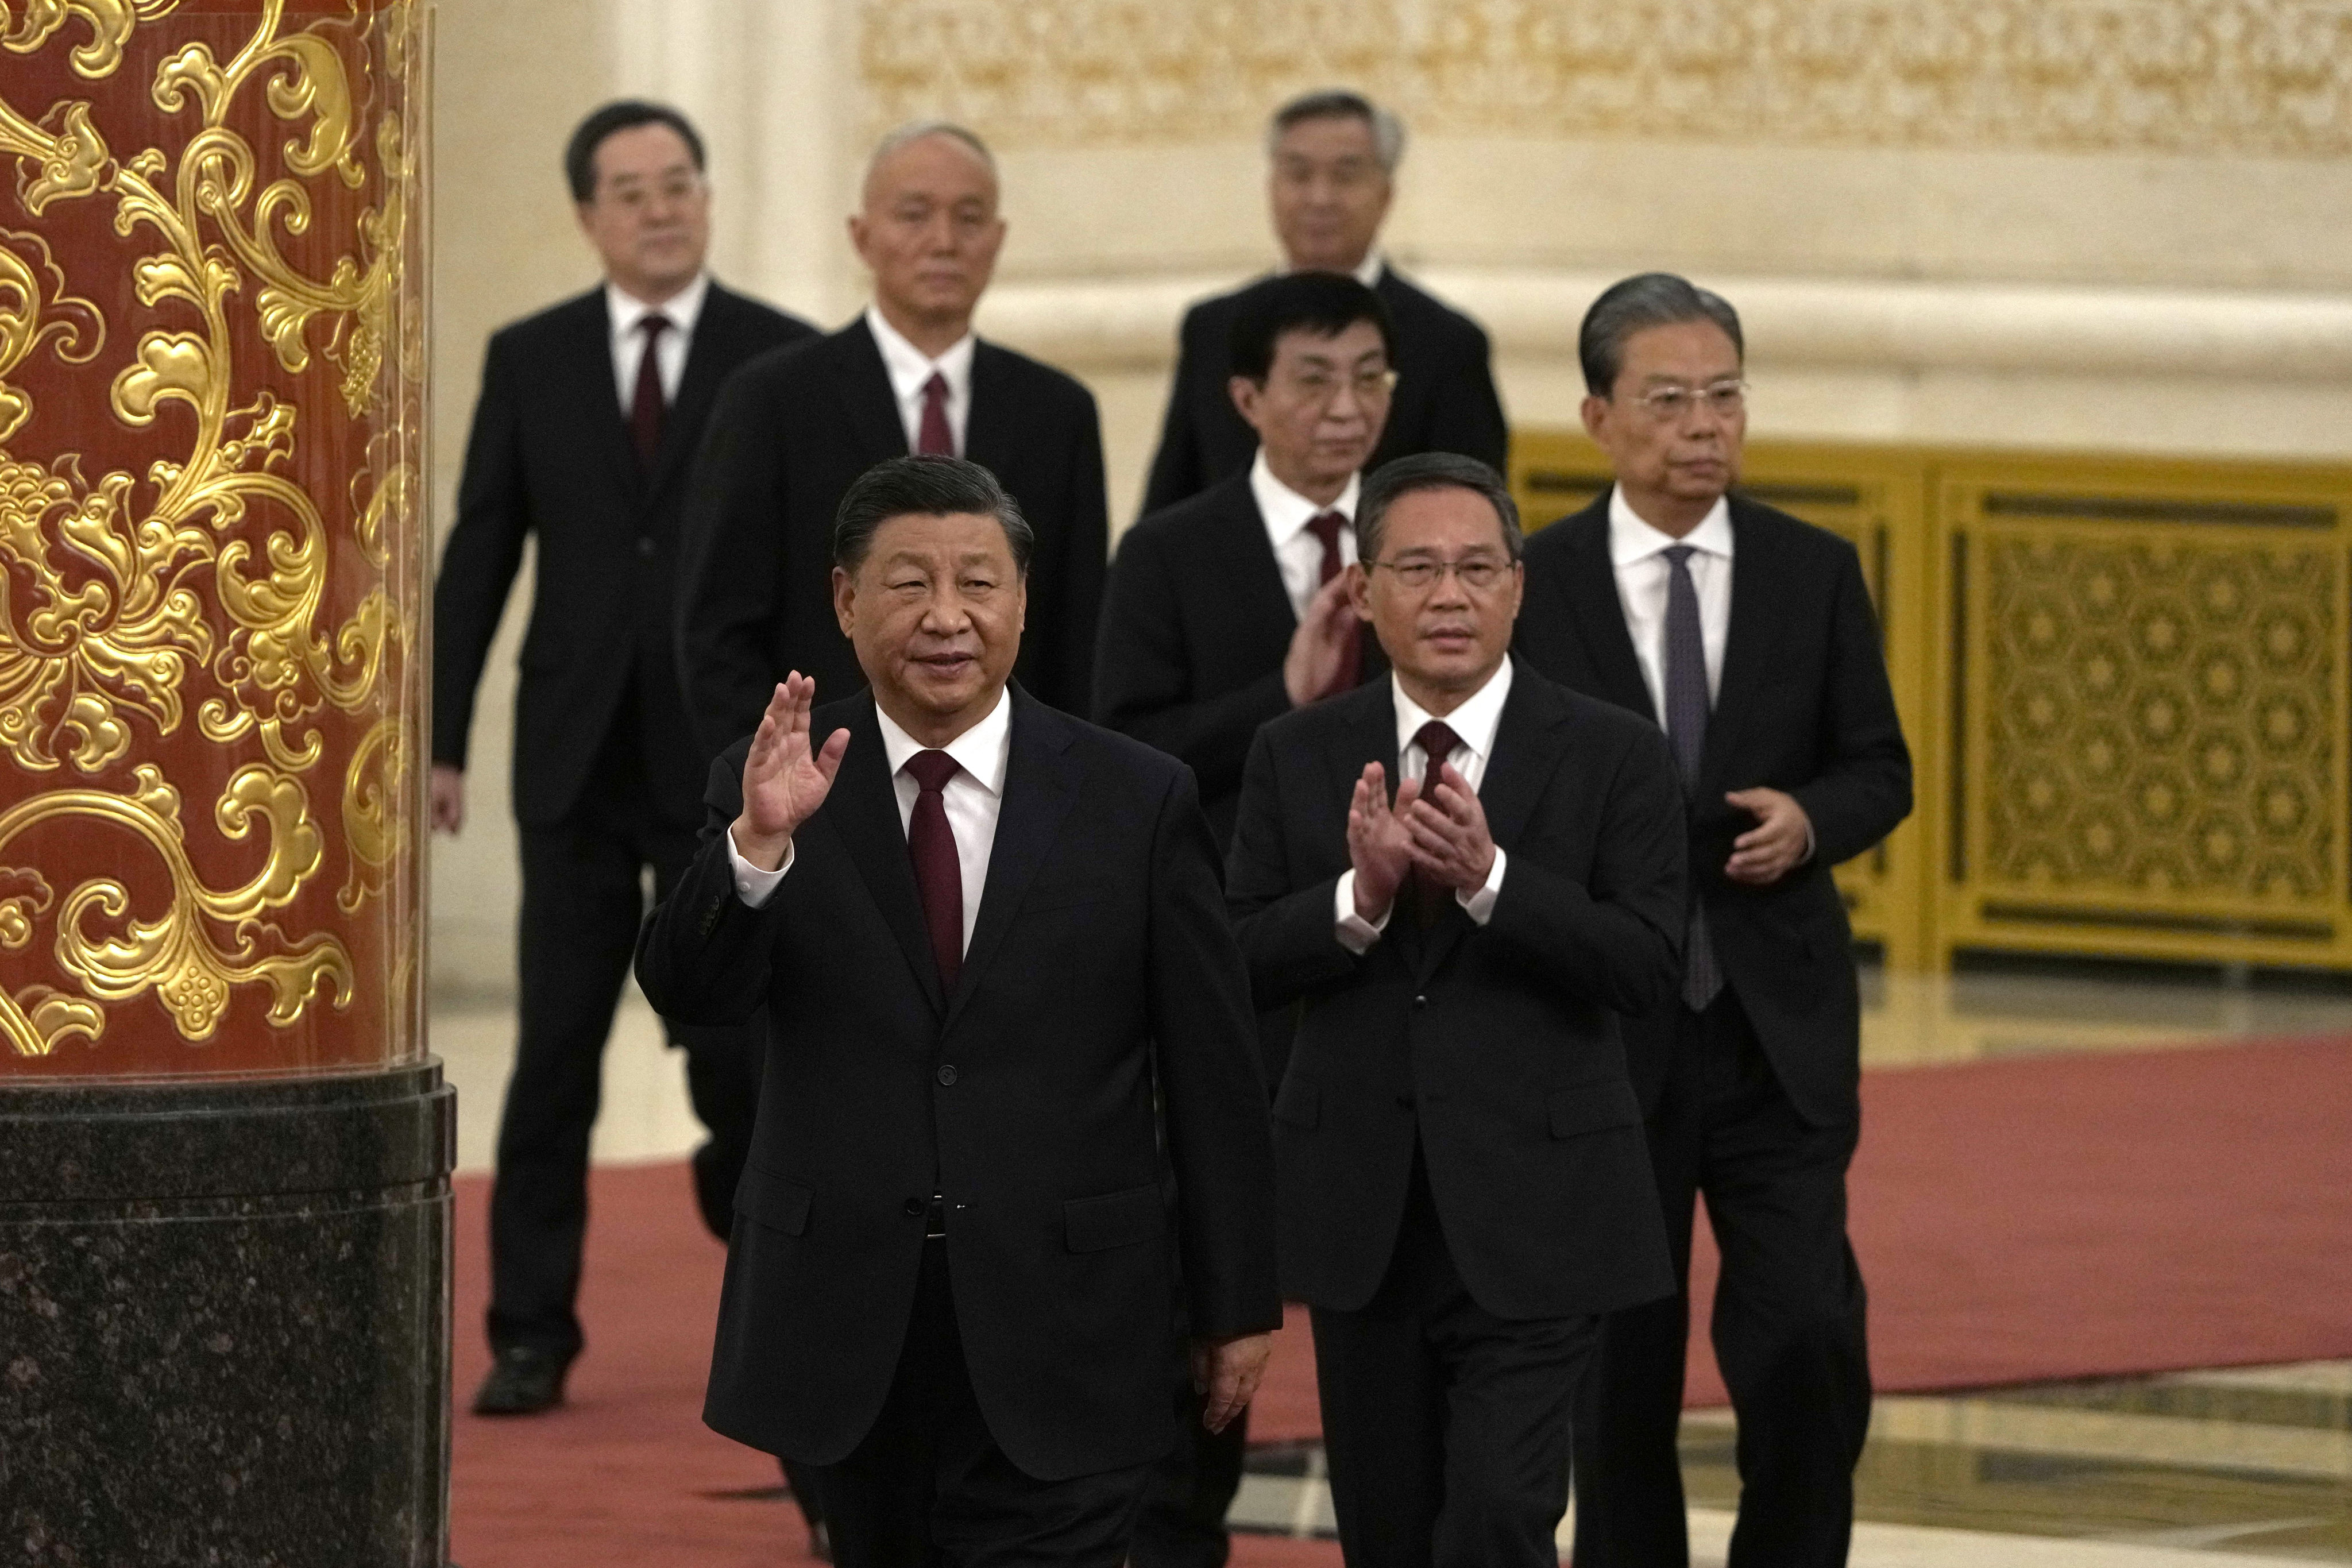 Li Qiang, tipped to be China’s next premier, and other members of the new Politburo Standing Committee follow President Xi Jinping into the Great Hall of the People in Beijing. Photo: AP